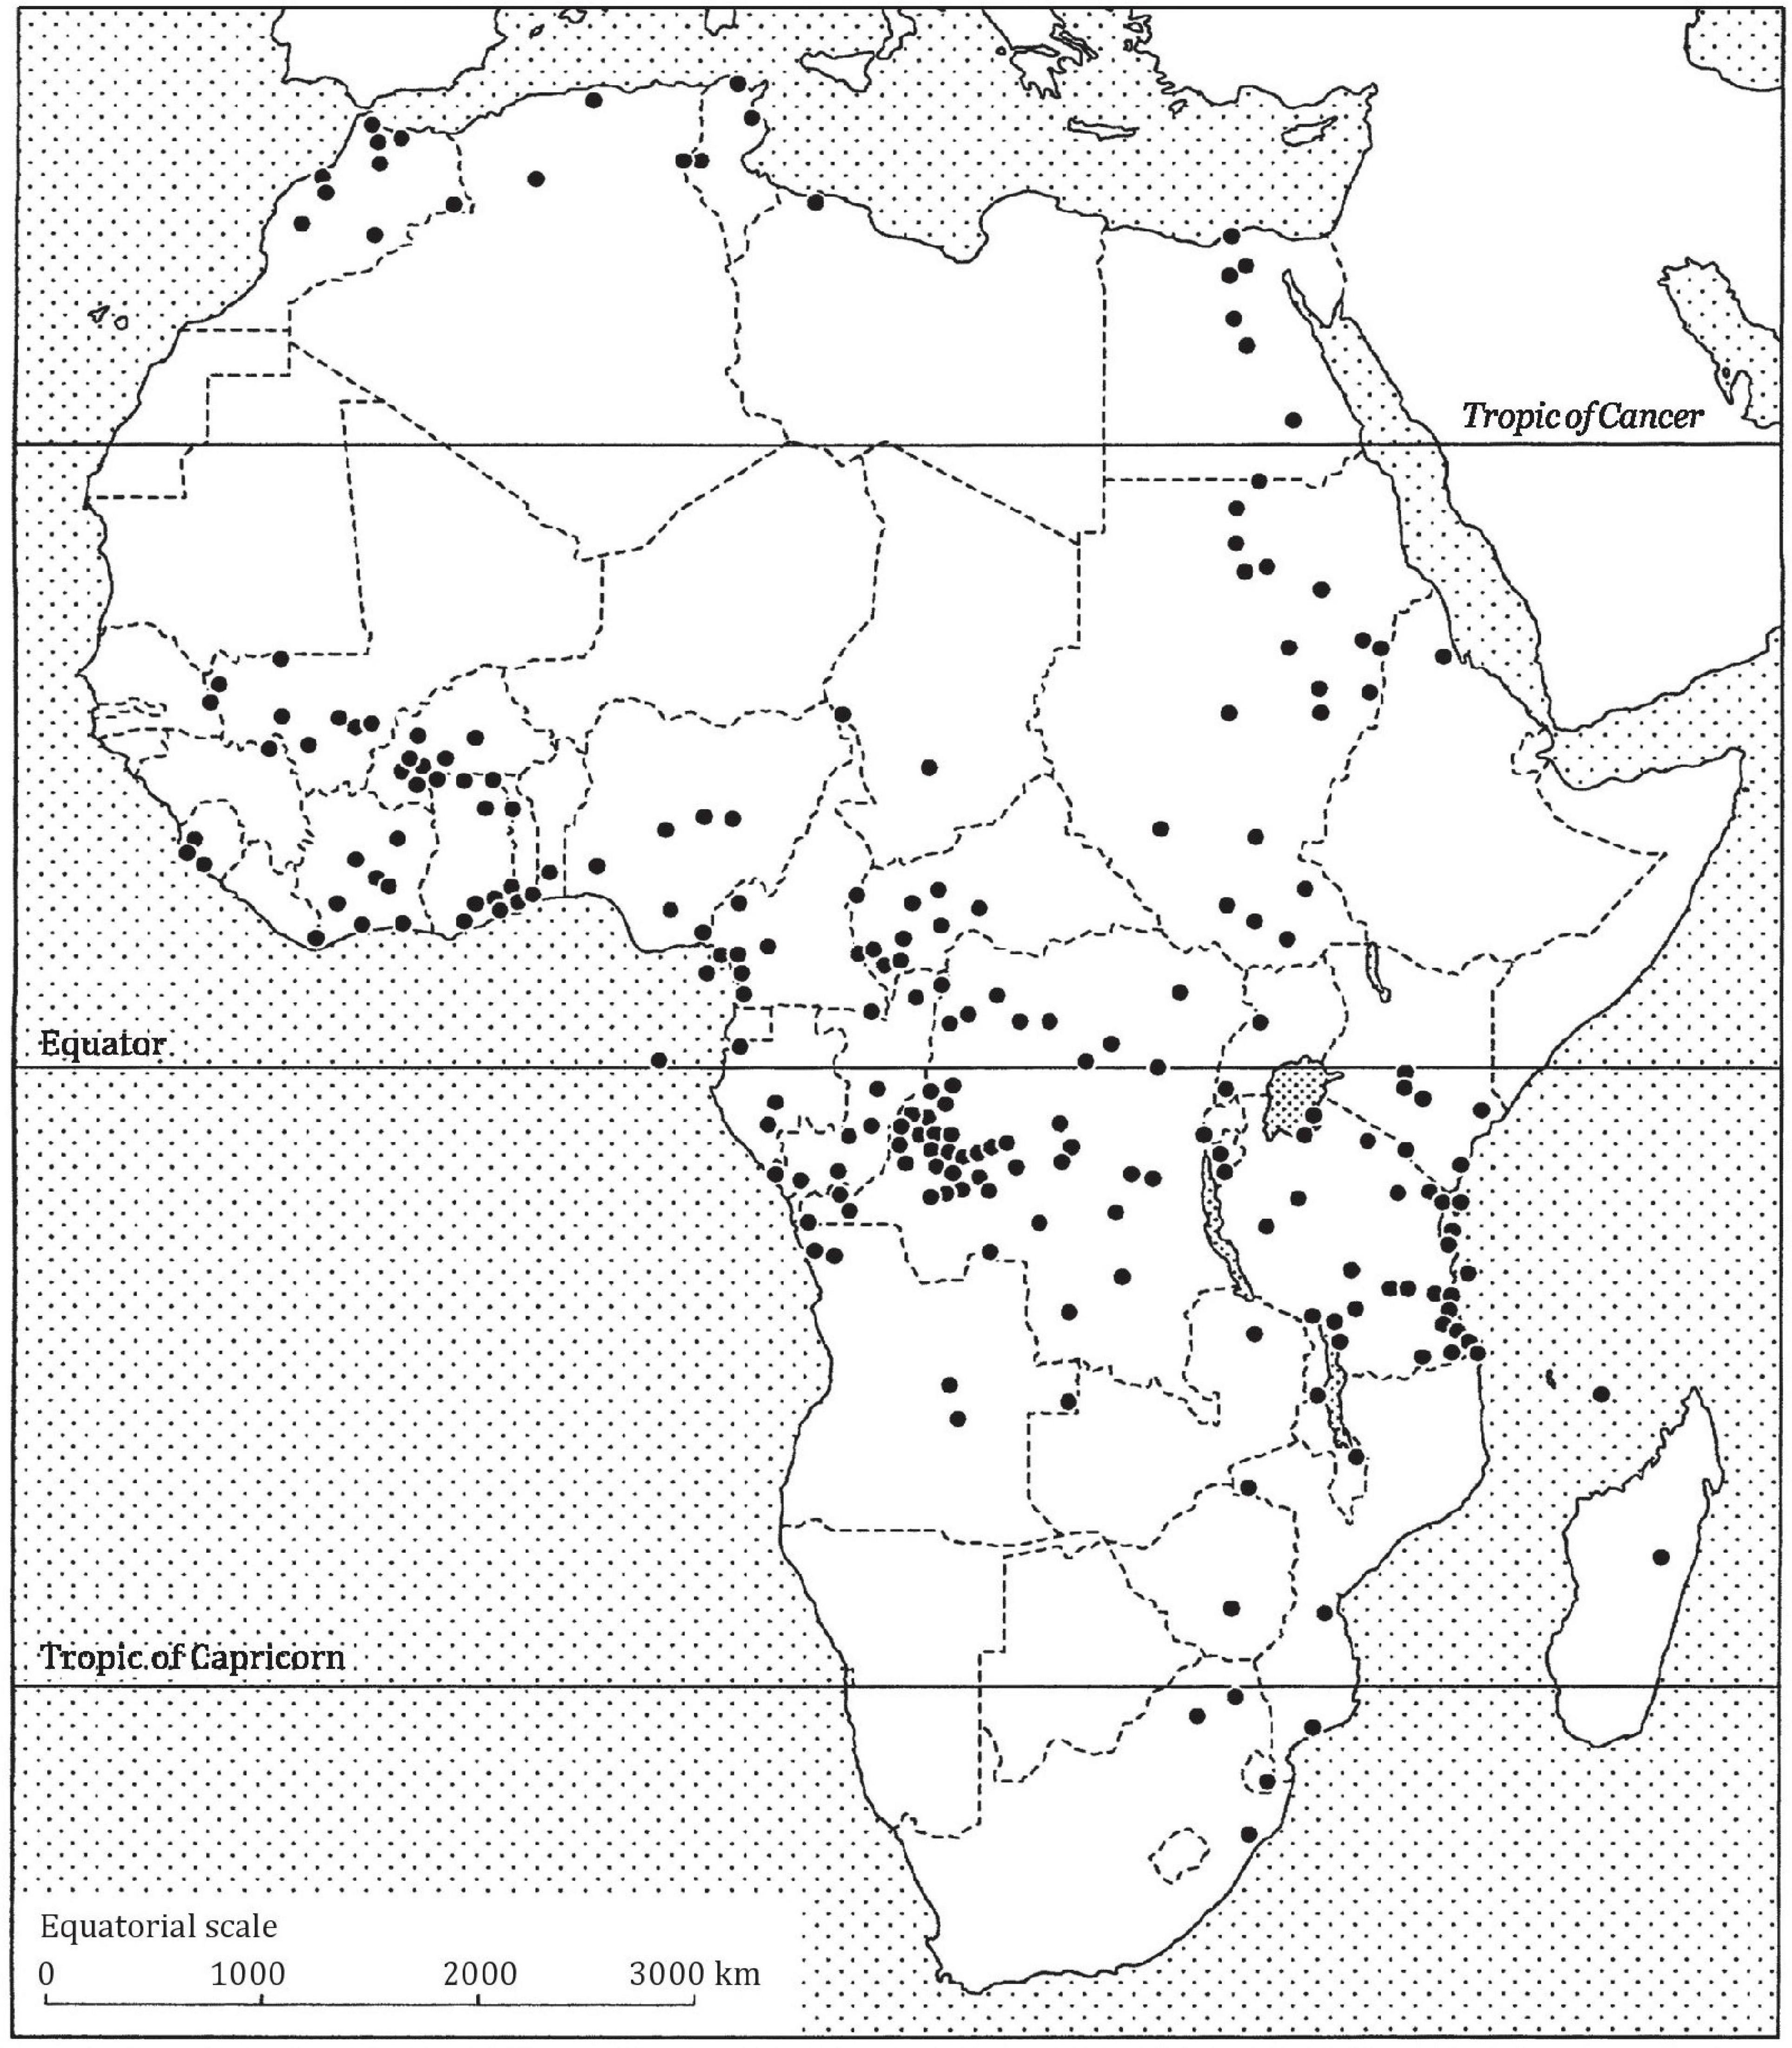 Current status of research and gaps in knowledge of geophagic practices in Africa